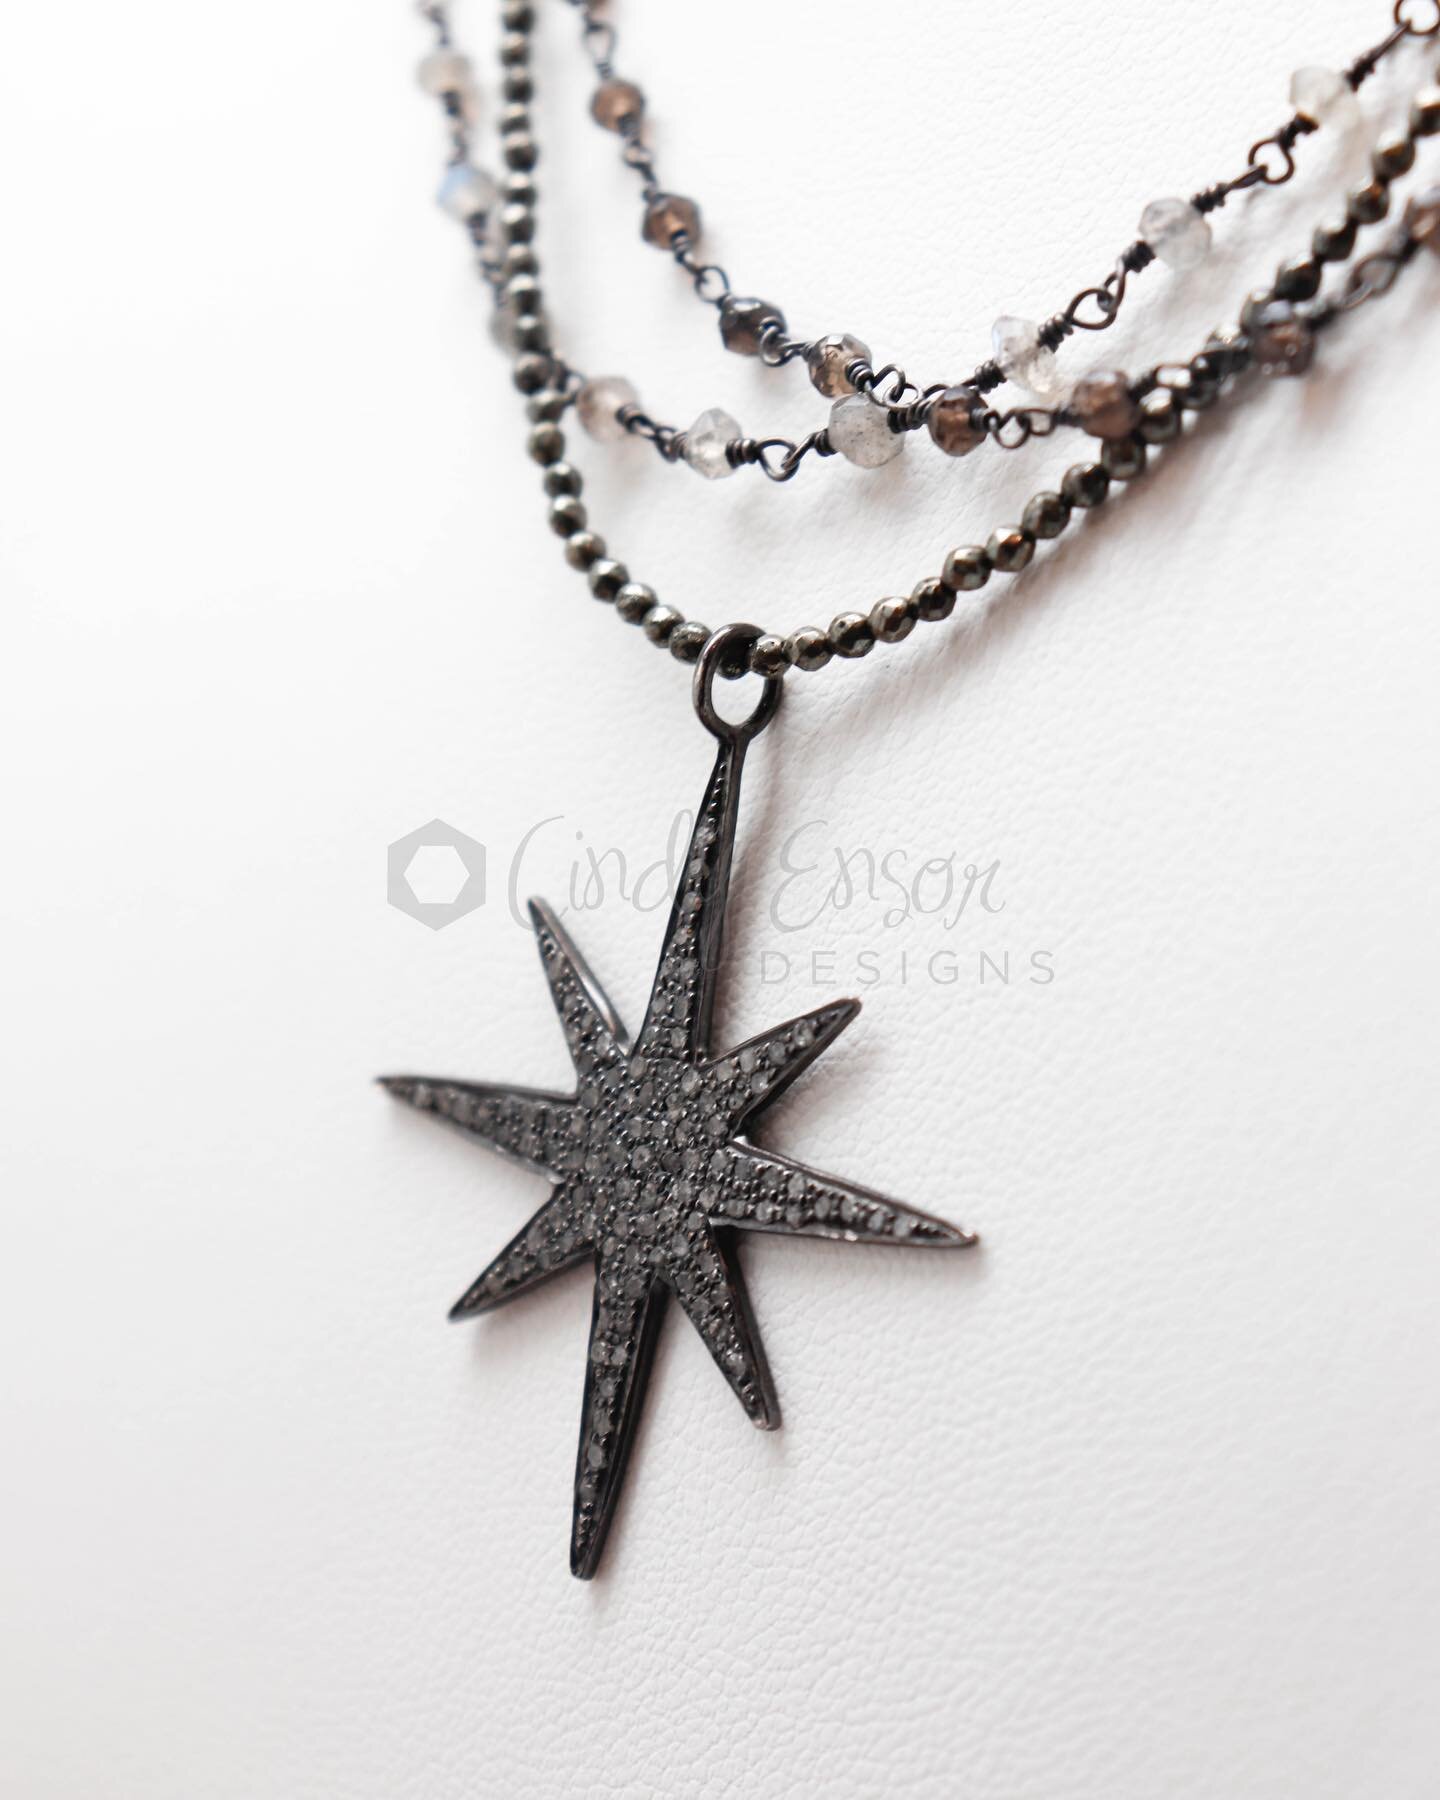 Want the layered look but don&rsquo;t want to wear multiple necklaces? Our multi layered star necklace is PERFECT for you&hellip; all in one! This best seller is also available with a pave diamond cross pendant 🌟✝️💎 
&bull;
&bull;
&bull;
&bull;
&bu